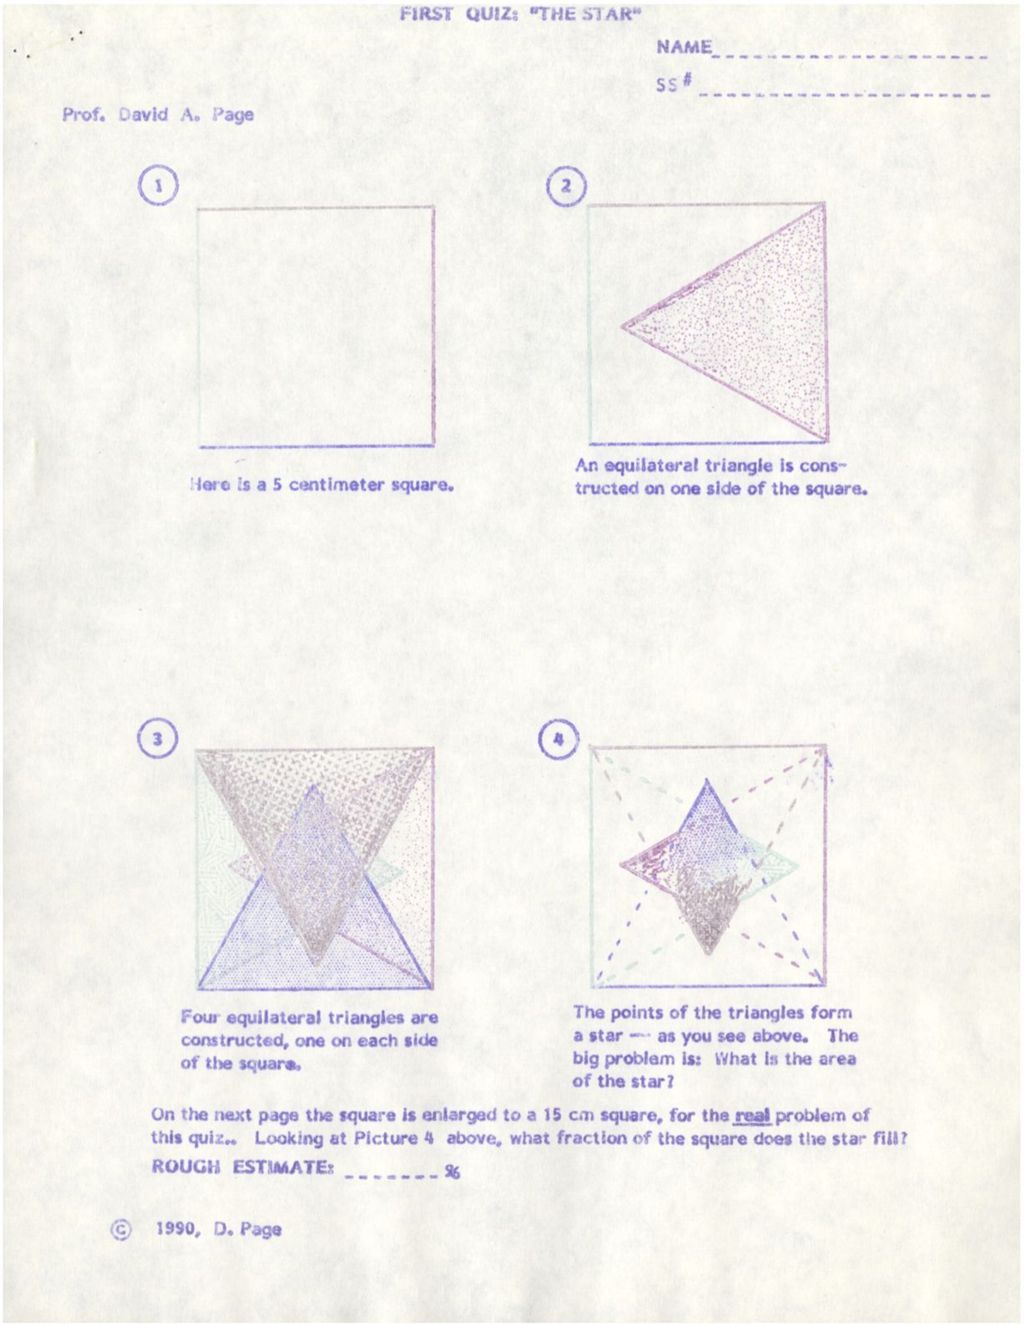 Miniature of First Quiz: “The Star” (This quiz has 2 hint sheets) (1990)